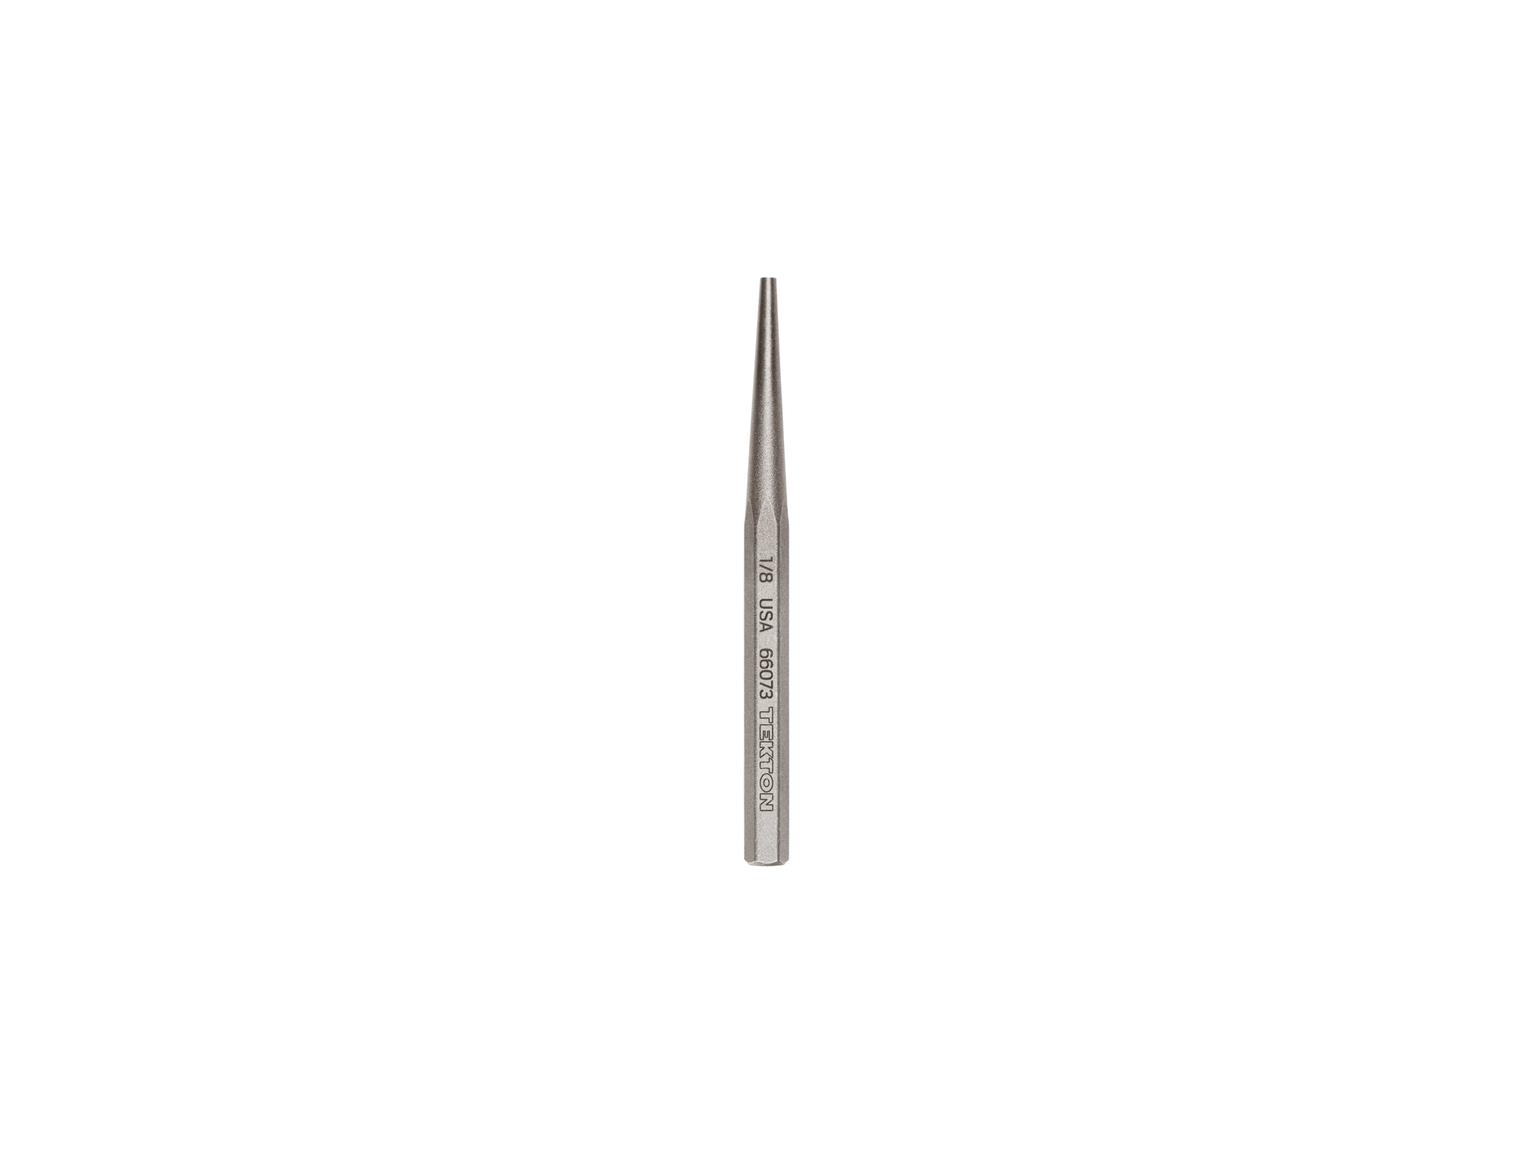 TEKTON 66073-T 1/8 Inch Solid Punch